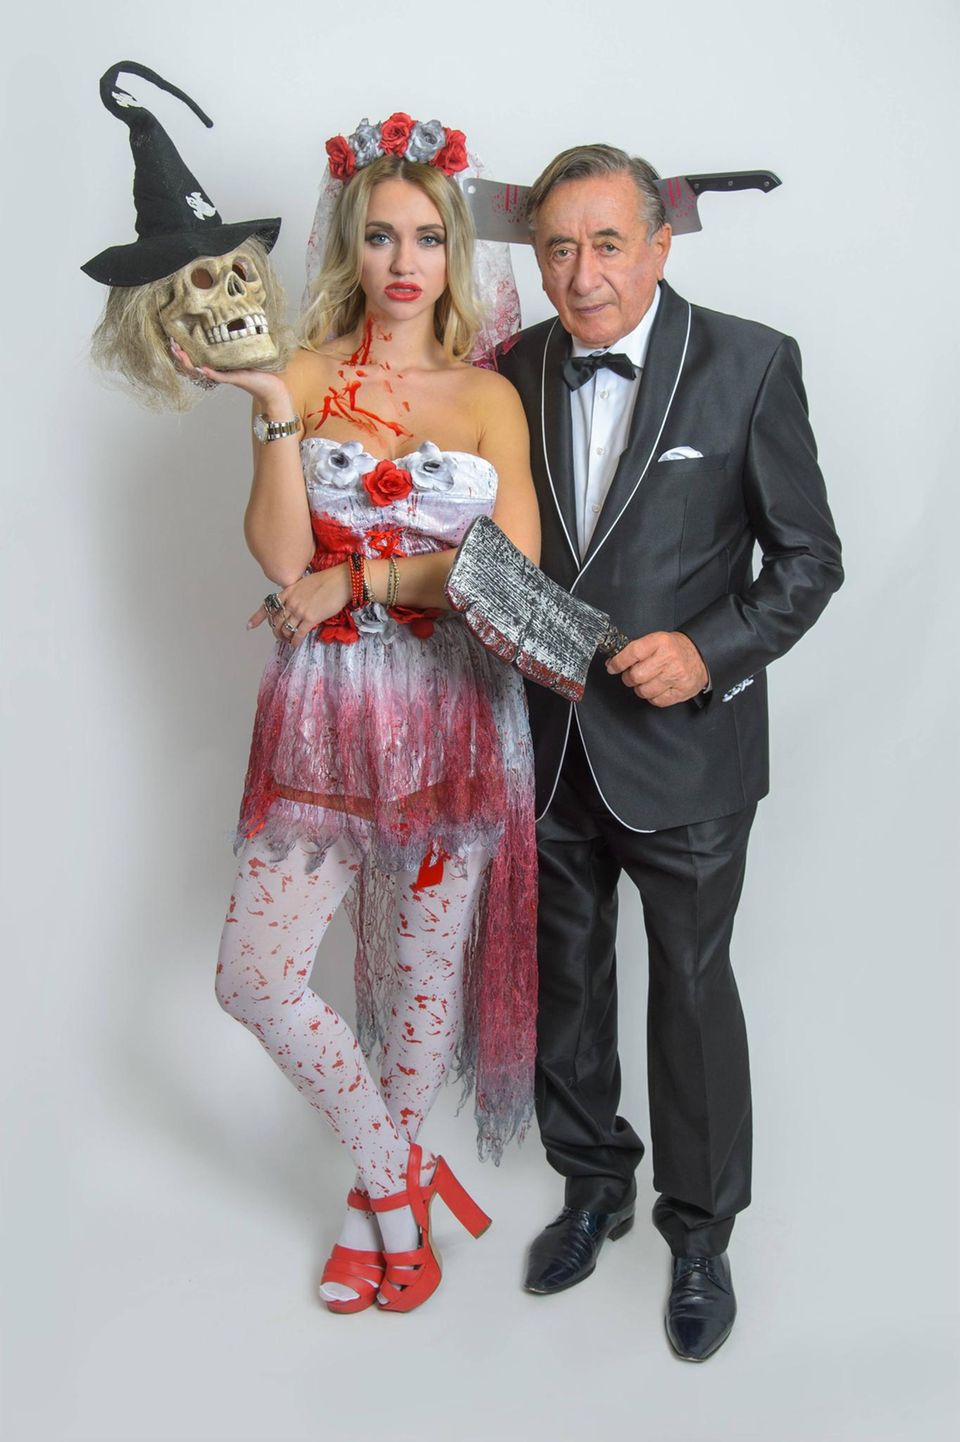 Richard un Cathy Lugner im Halloween-Outfit